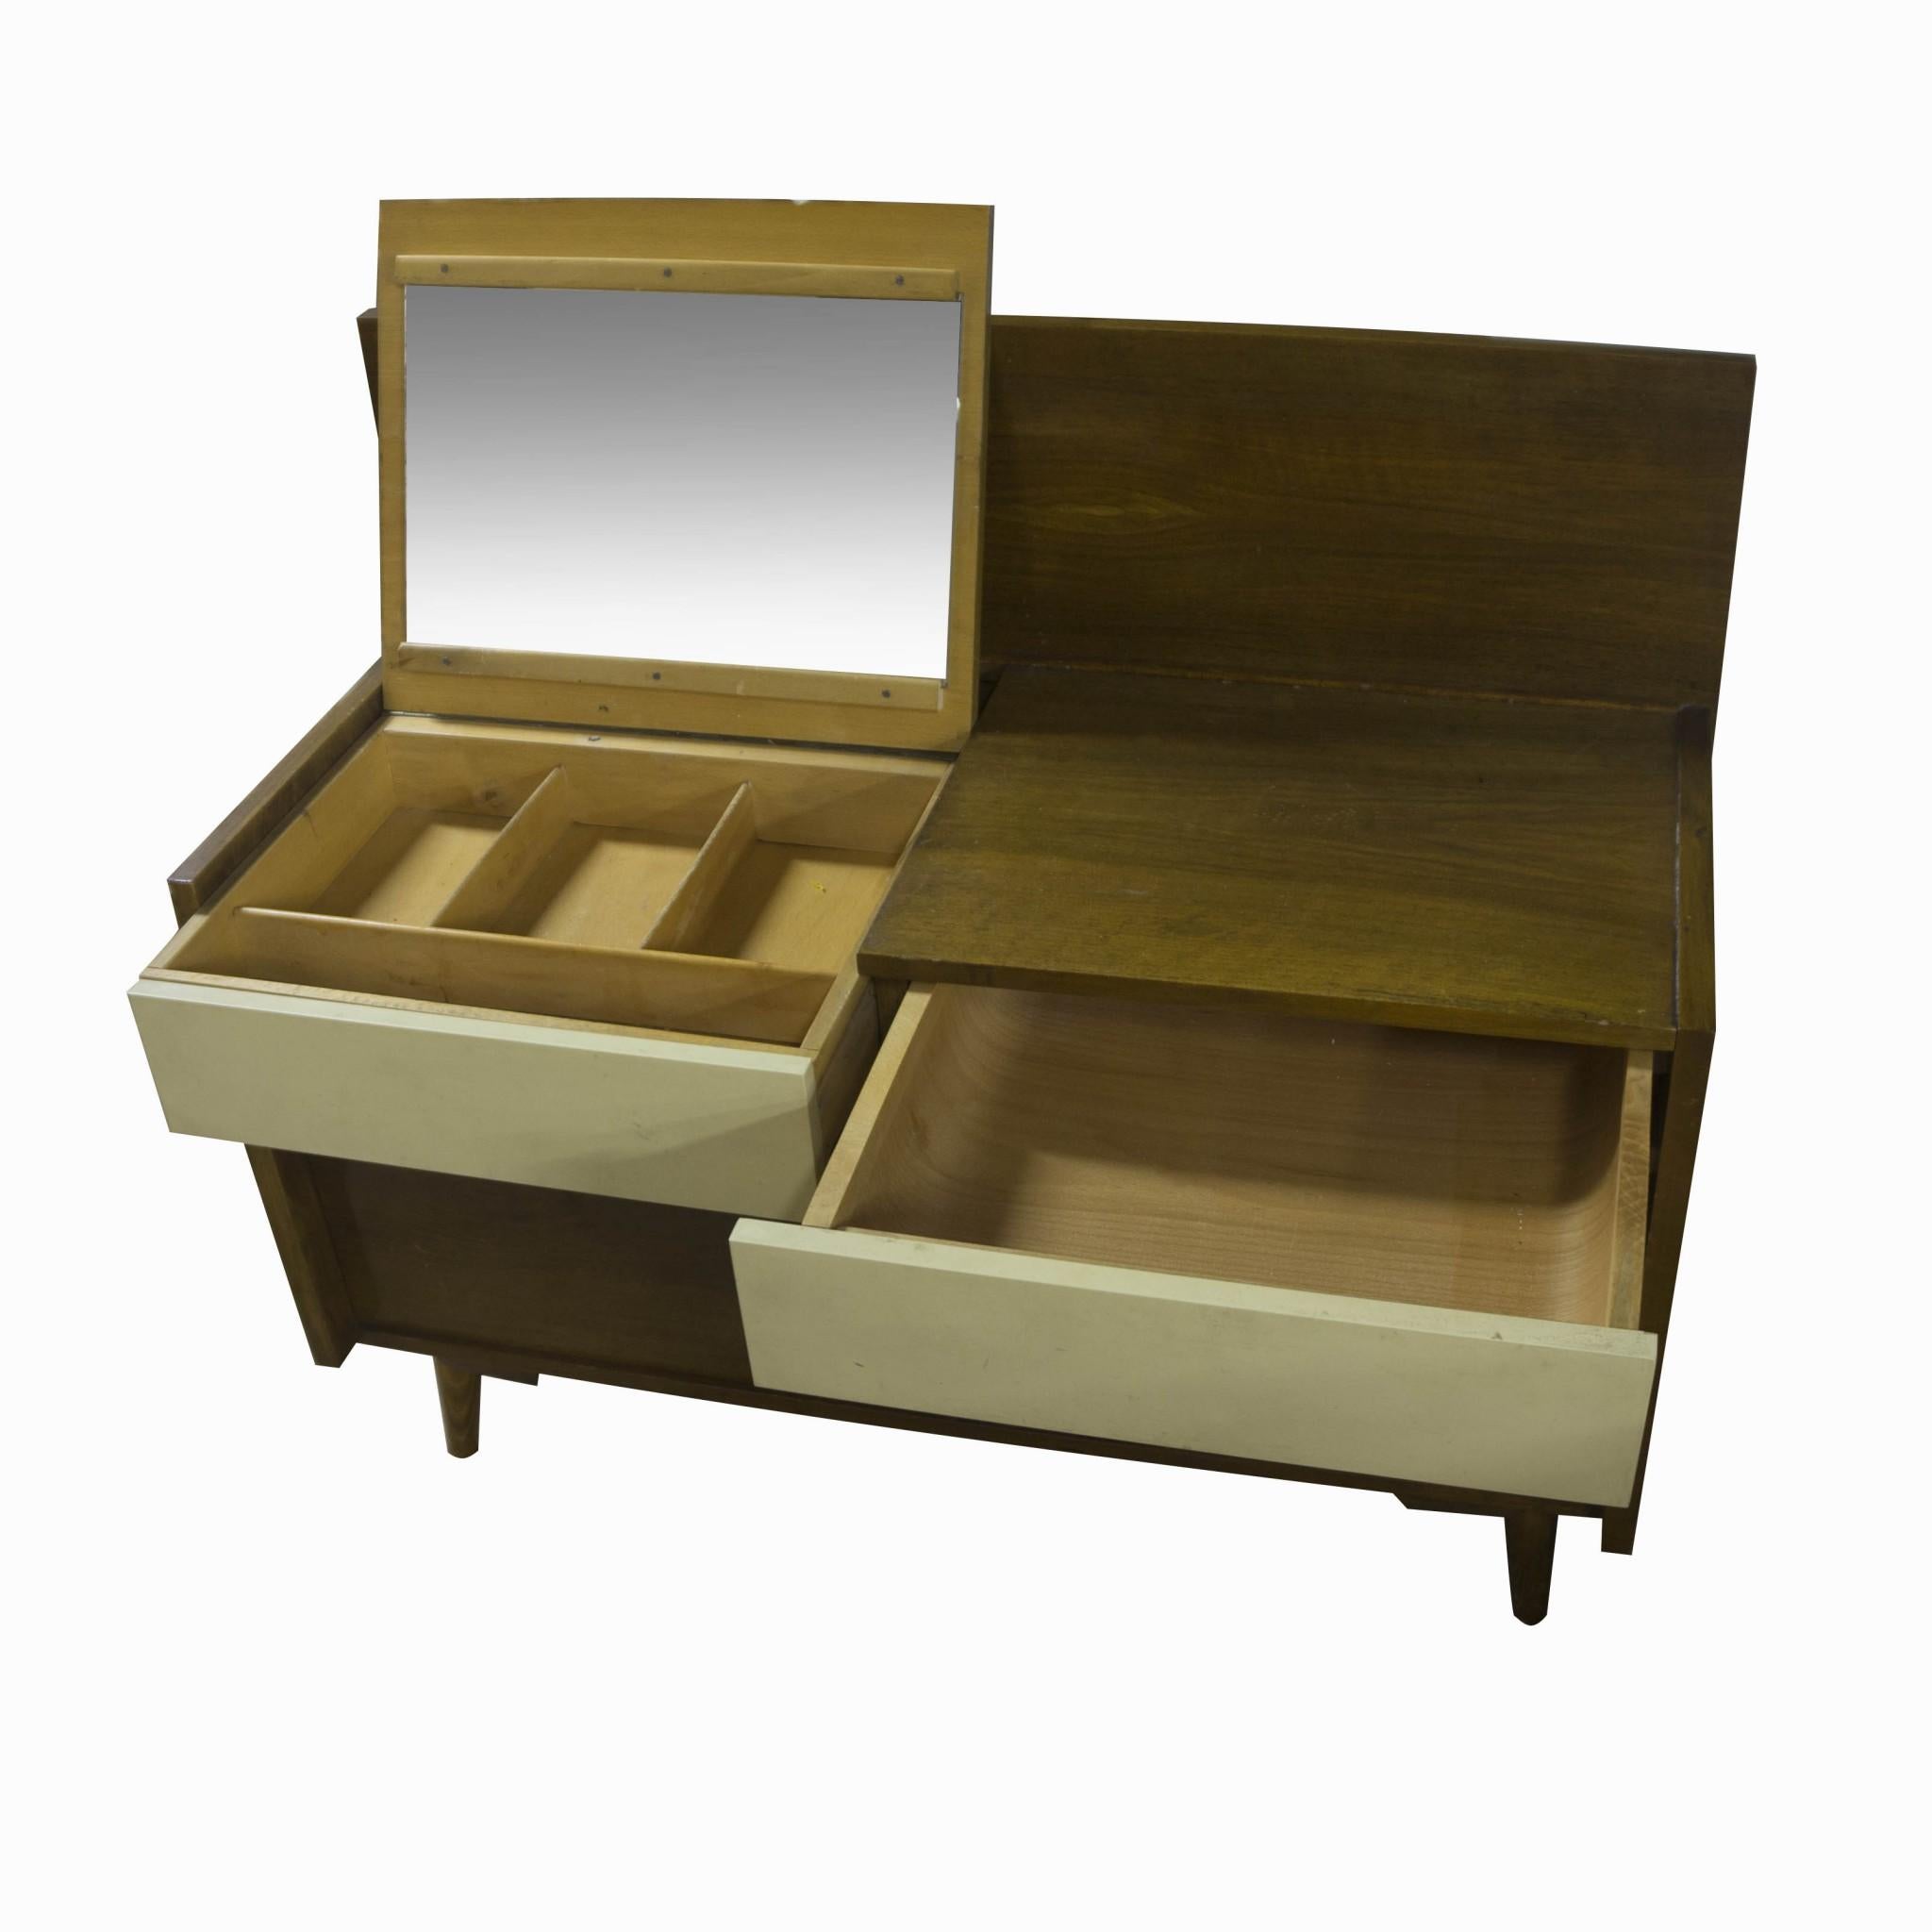 1970s Czechoslovak dressing table. Beechwood, plywood, probably polished elm veneer, lacquered drawers. In very good condition.

 